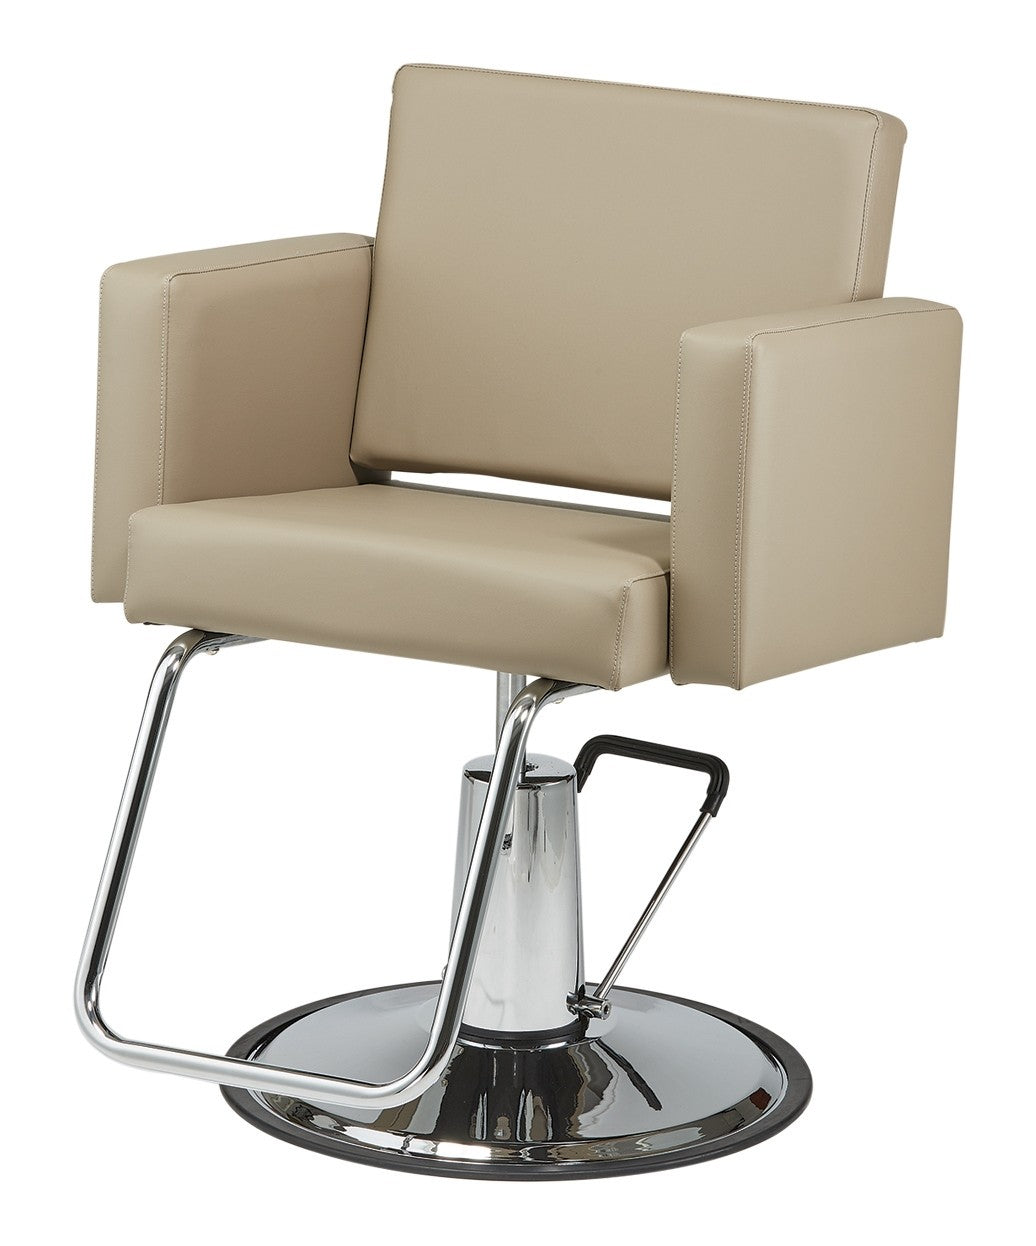 Pibbs 3406 Cosmo Styling Chair